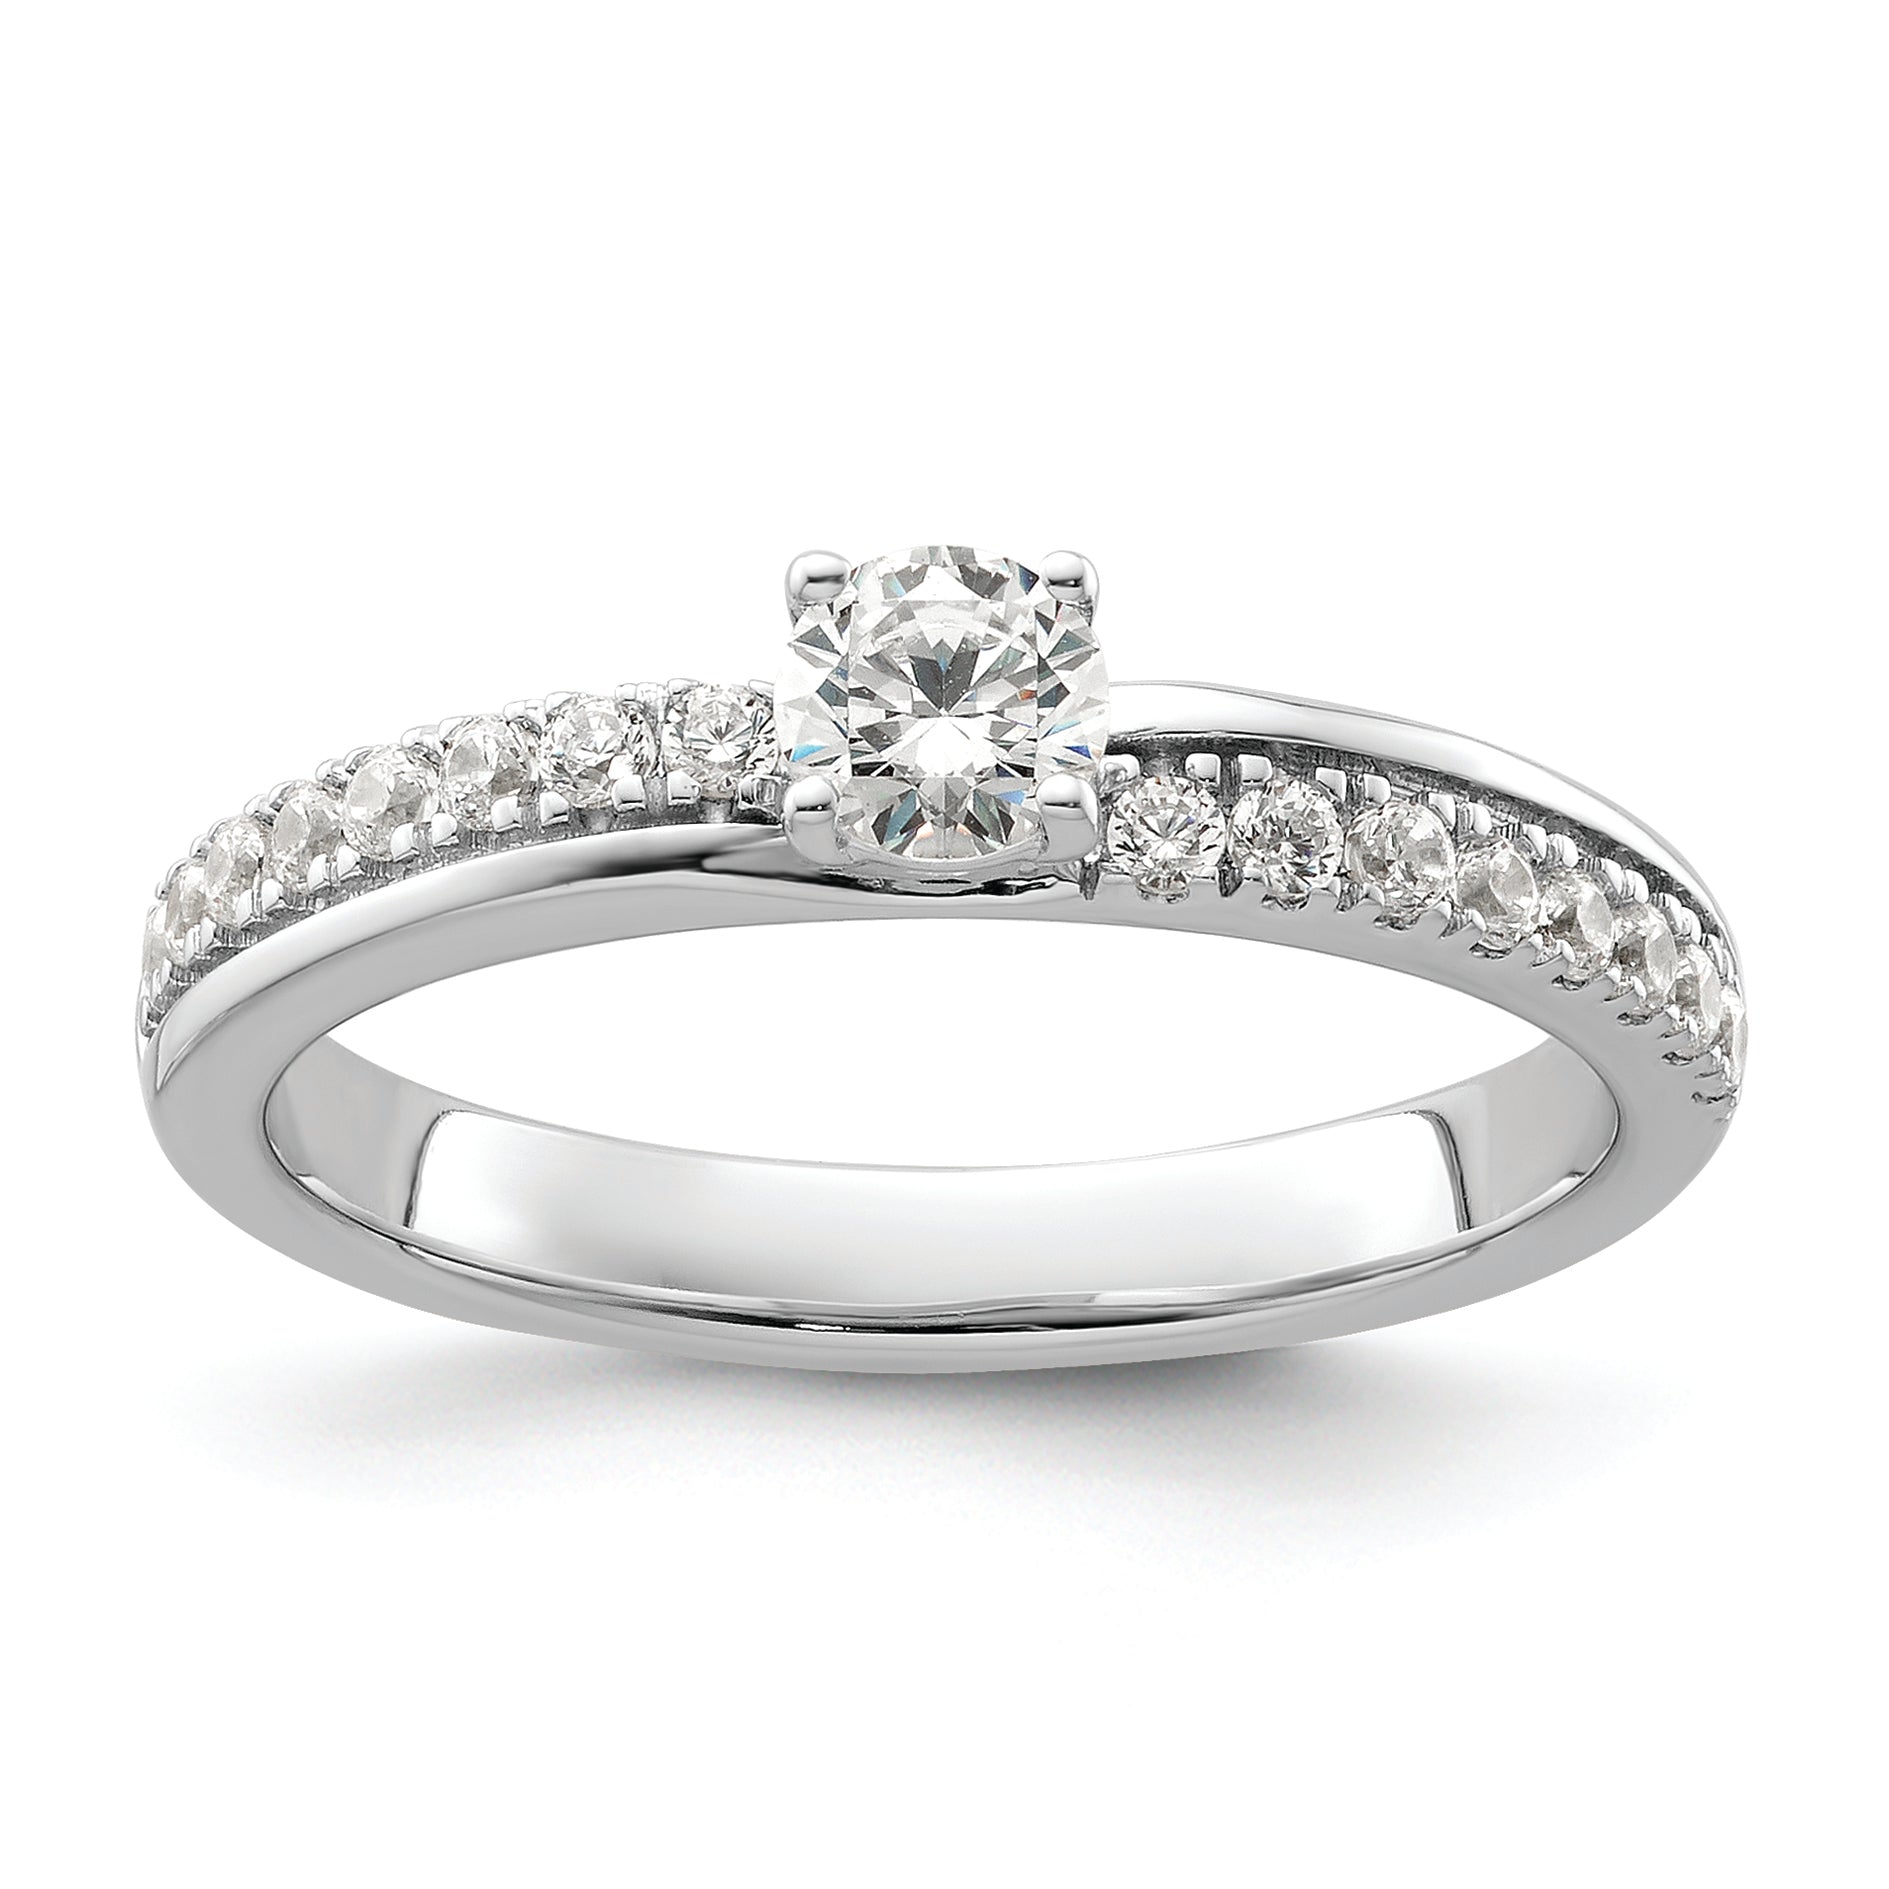 Two Promises 14k White Gold Diamond Complete Engagement Ring